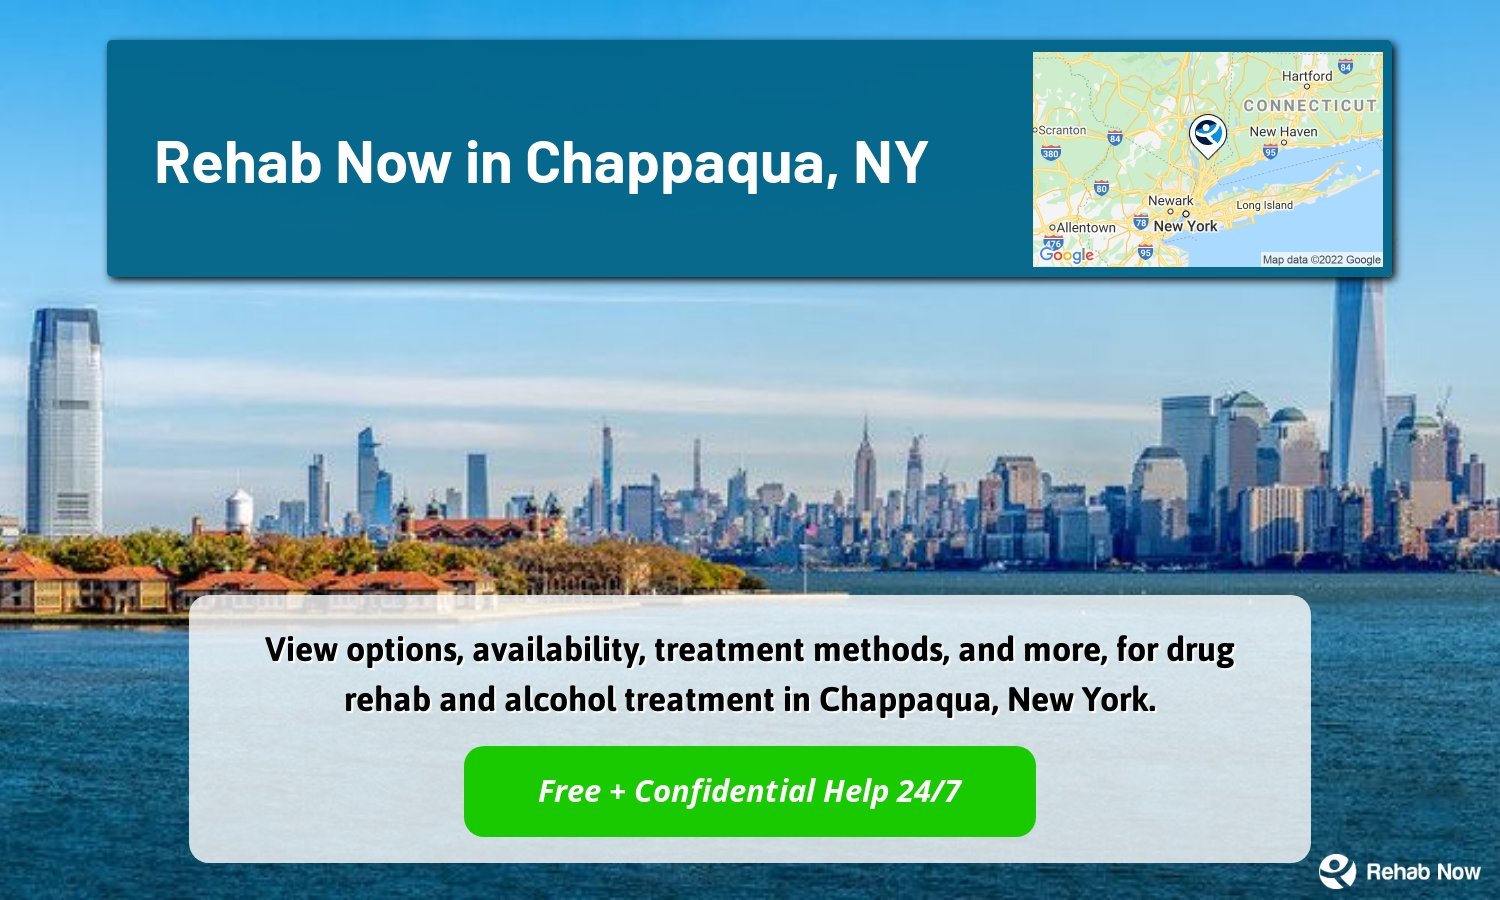 View options, availability, treatment methods, and more, for drug rehab and alcohol treatment in Chappaqua, New York.